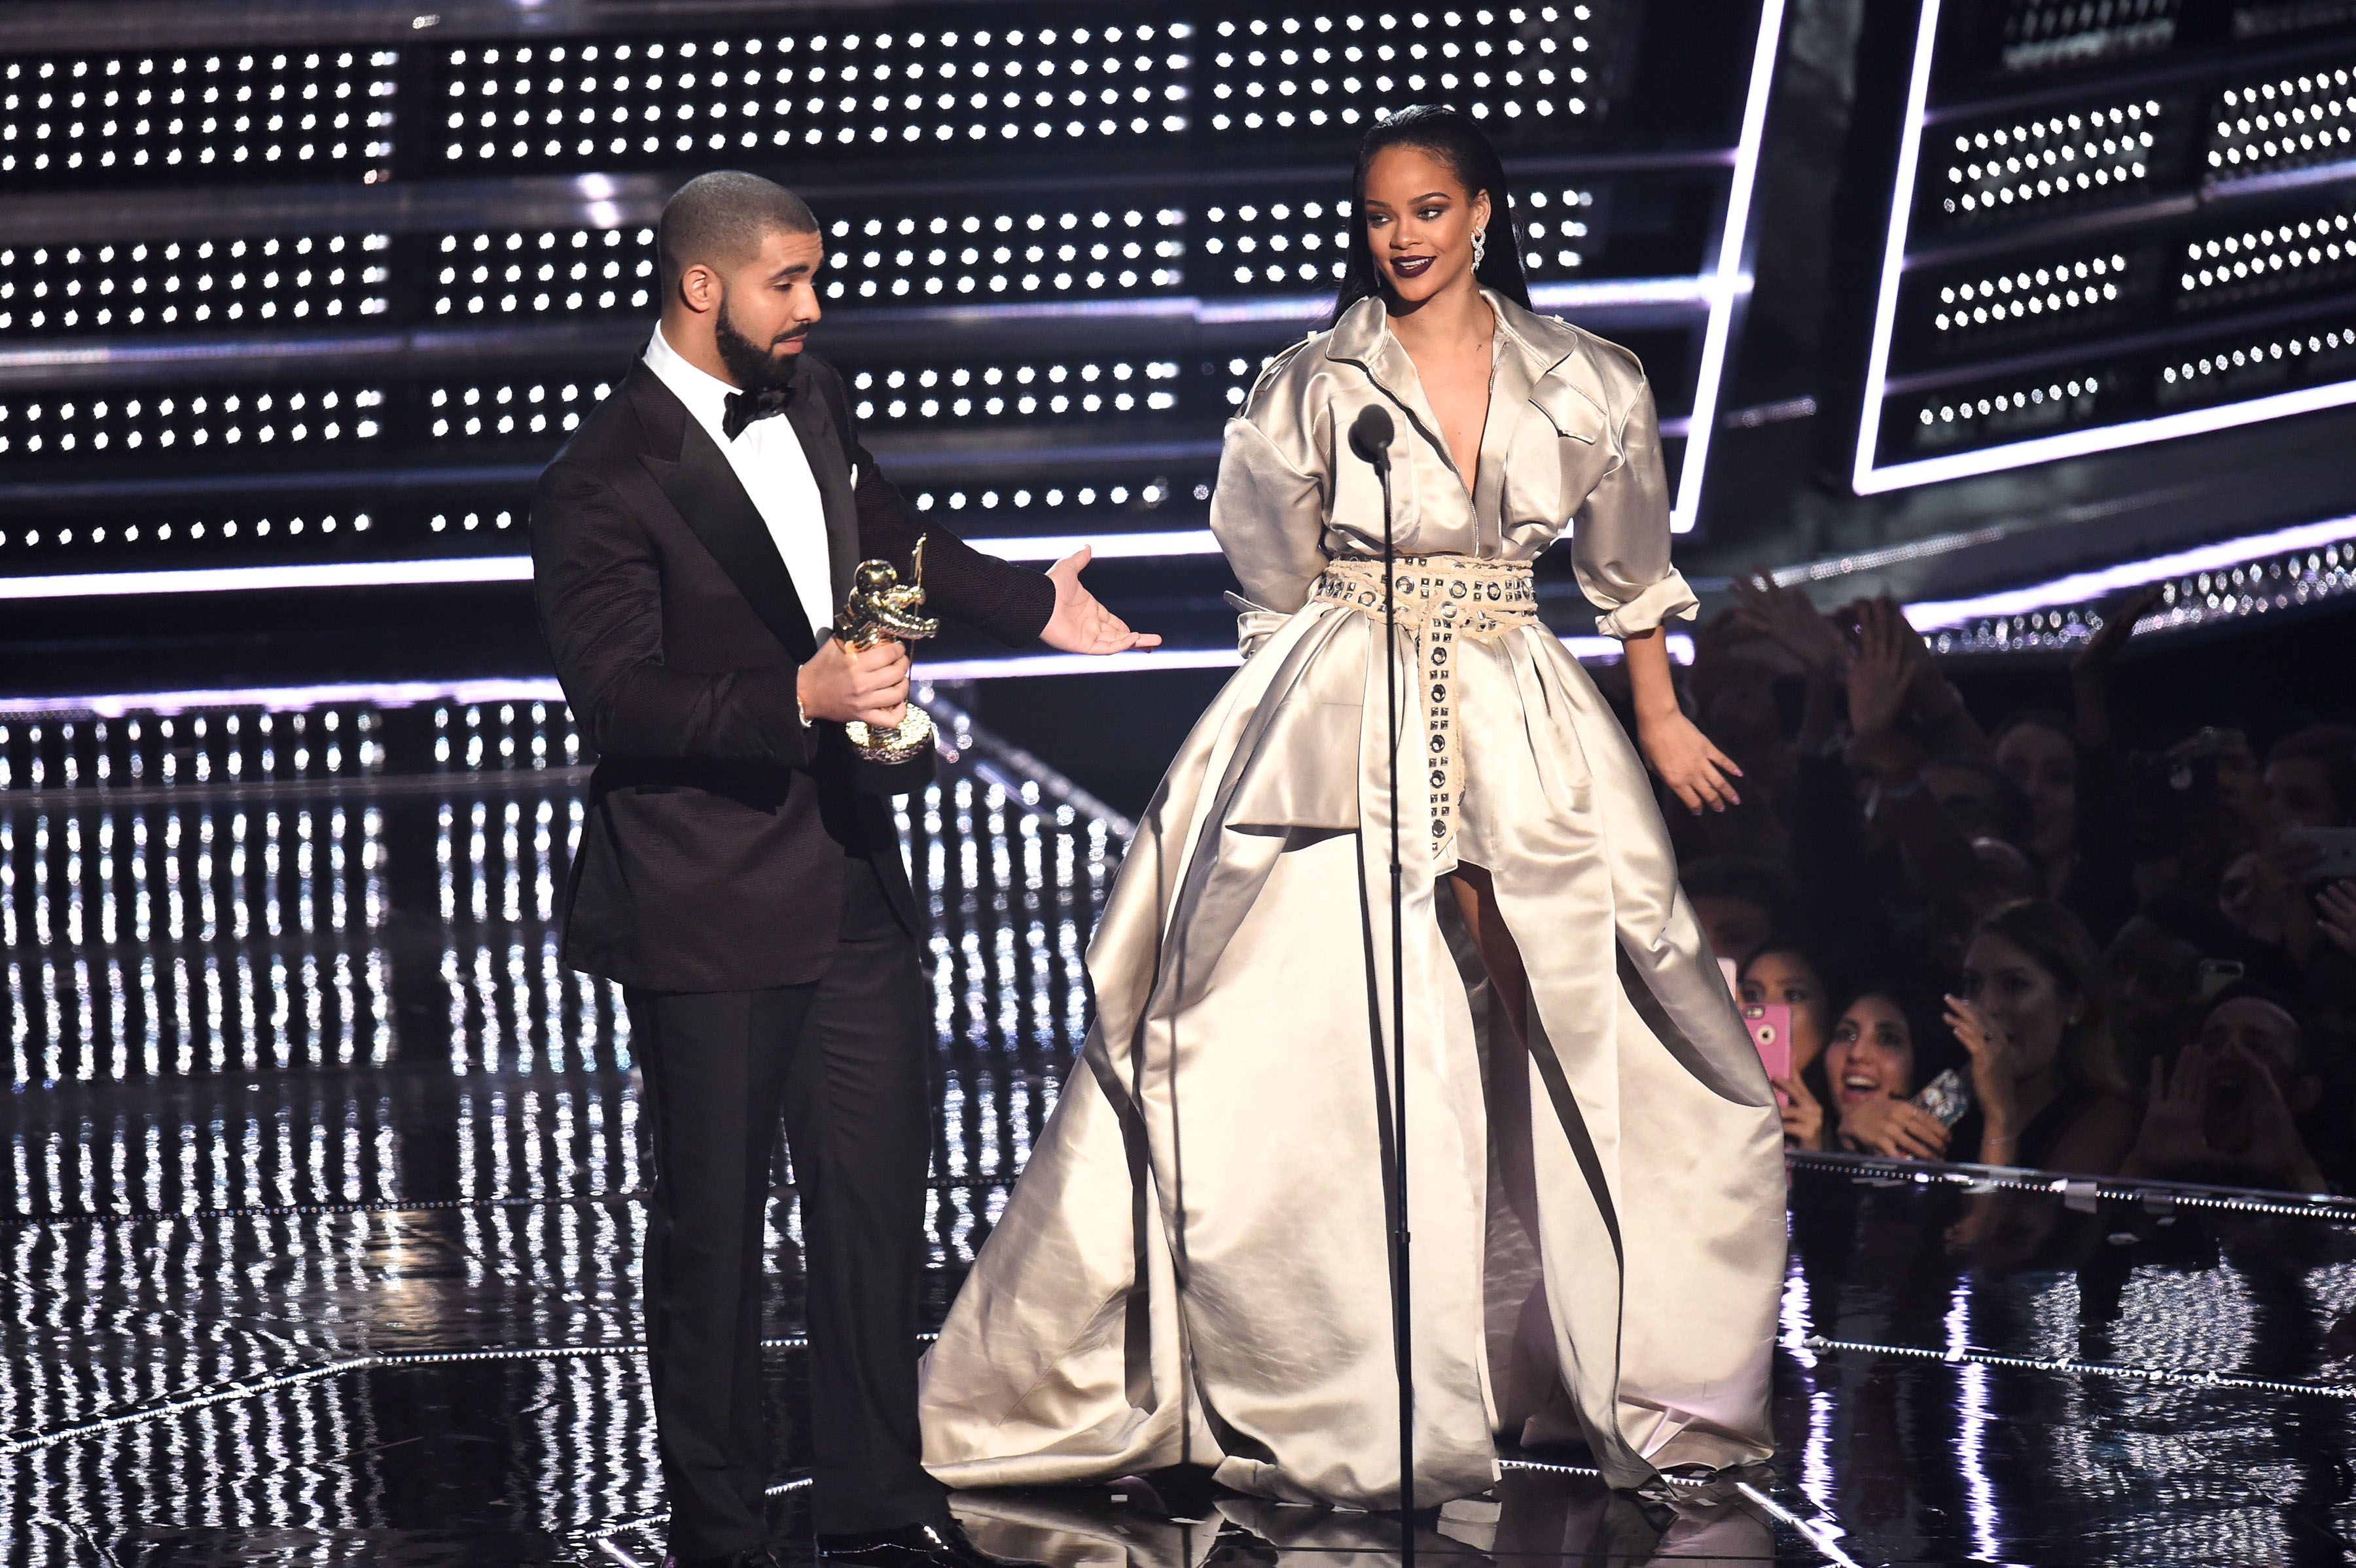 Drake presents Rihanna with the The Video Vanguard Award during the 2016 MTV Video Music Awards at Madison Square Garden on August 28, 2016 in New York City. | Source: Getty Images